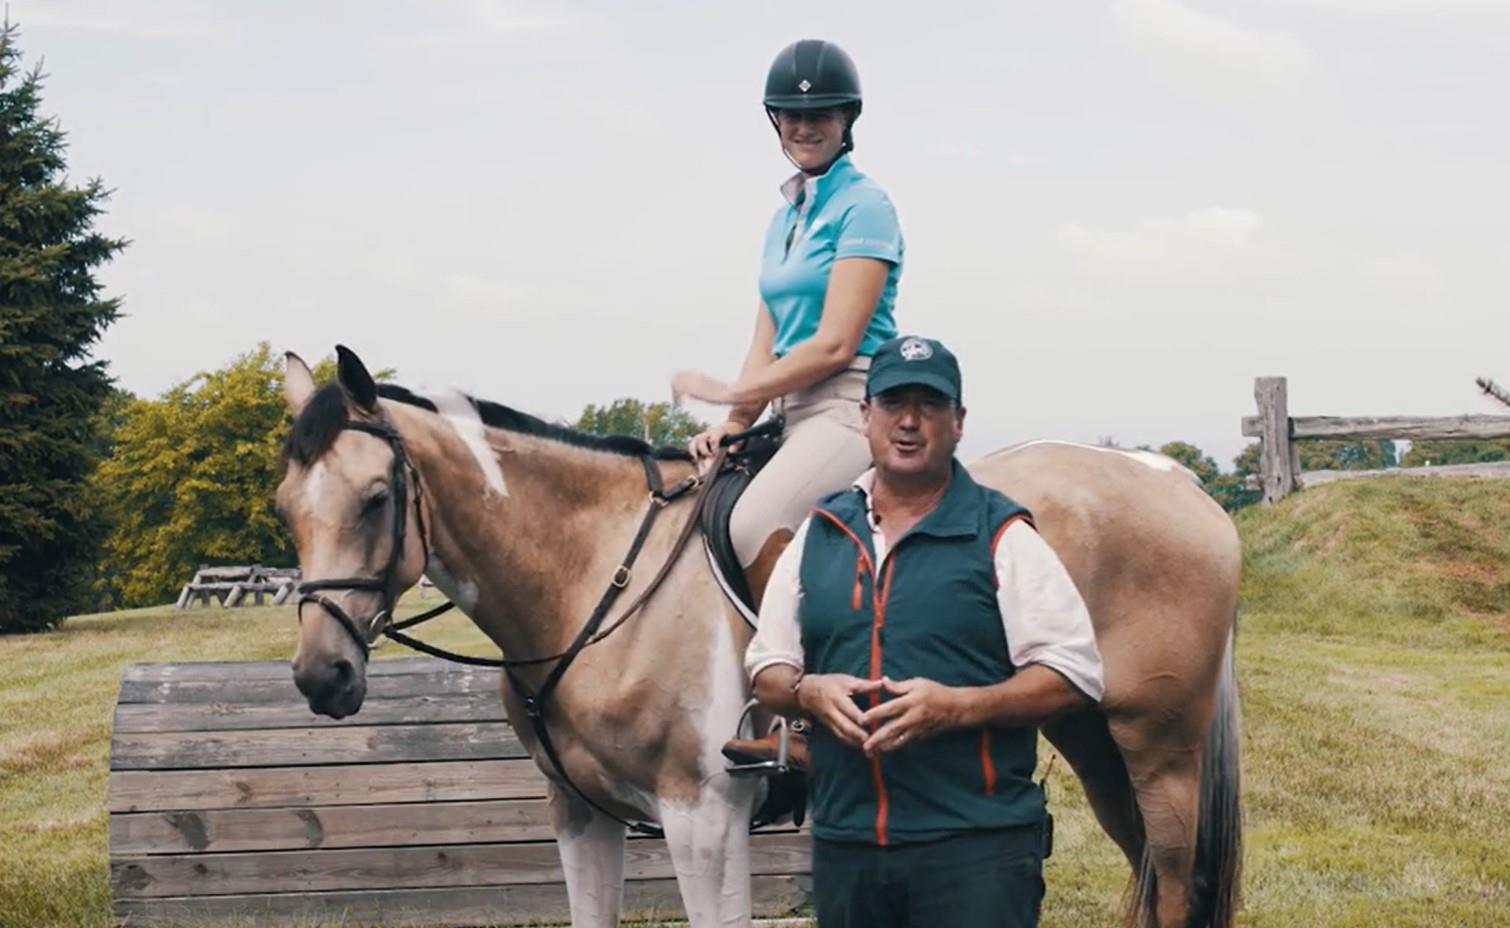 Eventing: Intro to Cross-Country Riding